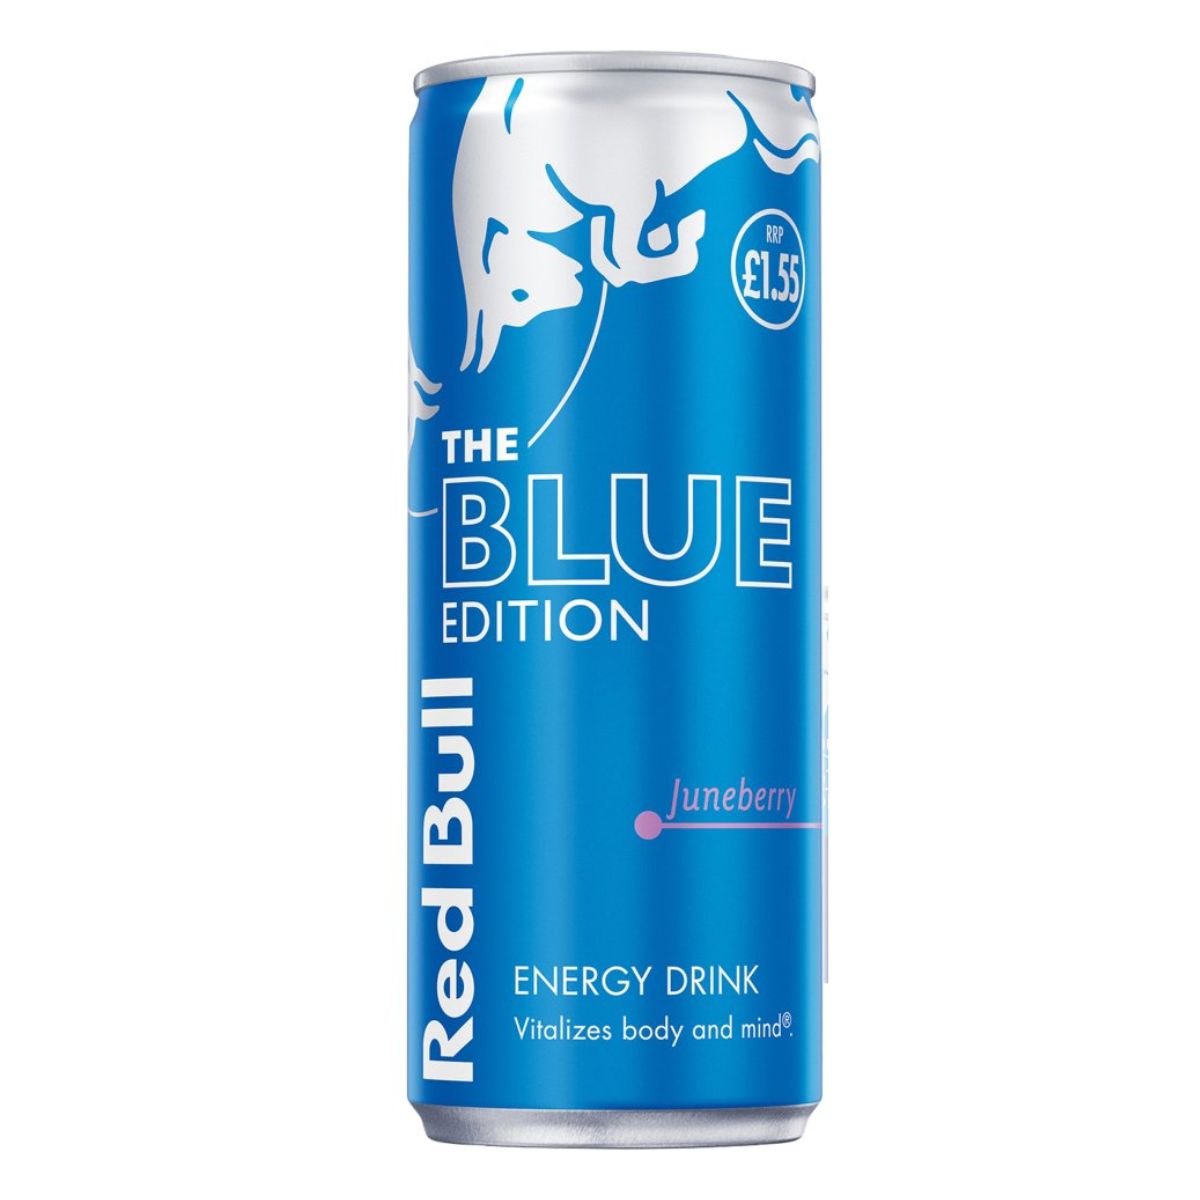 Can of Red Bull The Blue Edition energy drink with blueberry flavor, featuring a blue and silver design. Price tag shows £1.55.
Product Name: Red Bull - Energy Drink Blue Edition - 250ml